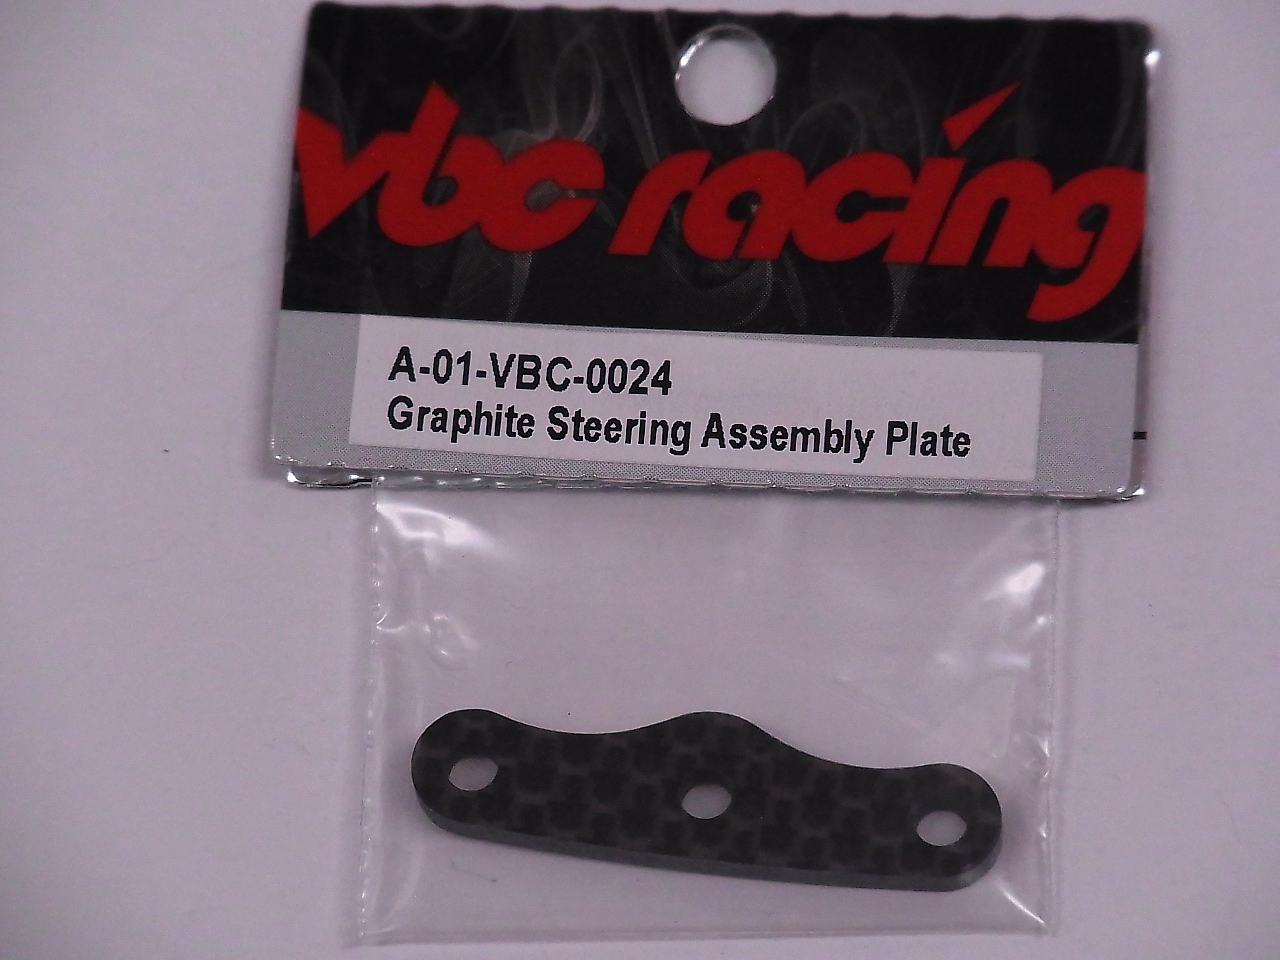 Grafhite Steering Assembly Top Plate